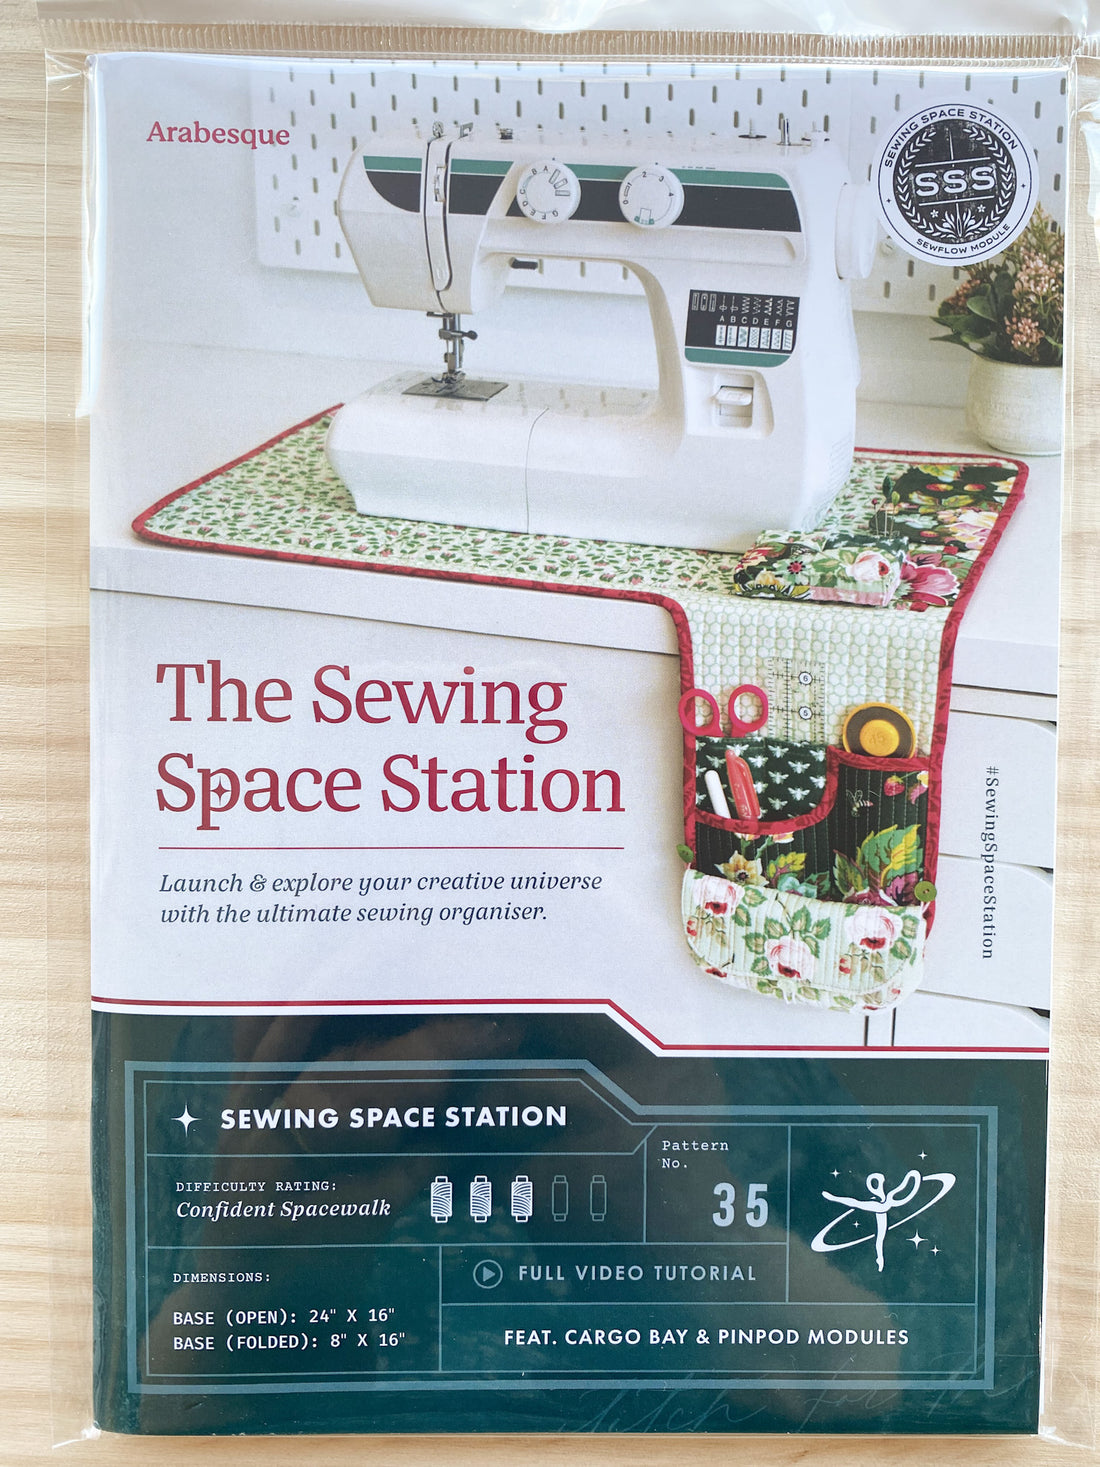 Sewing Space Station Pattern - Arabesque Scissors